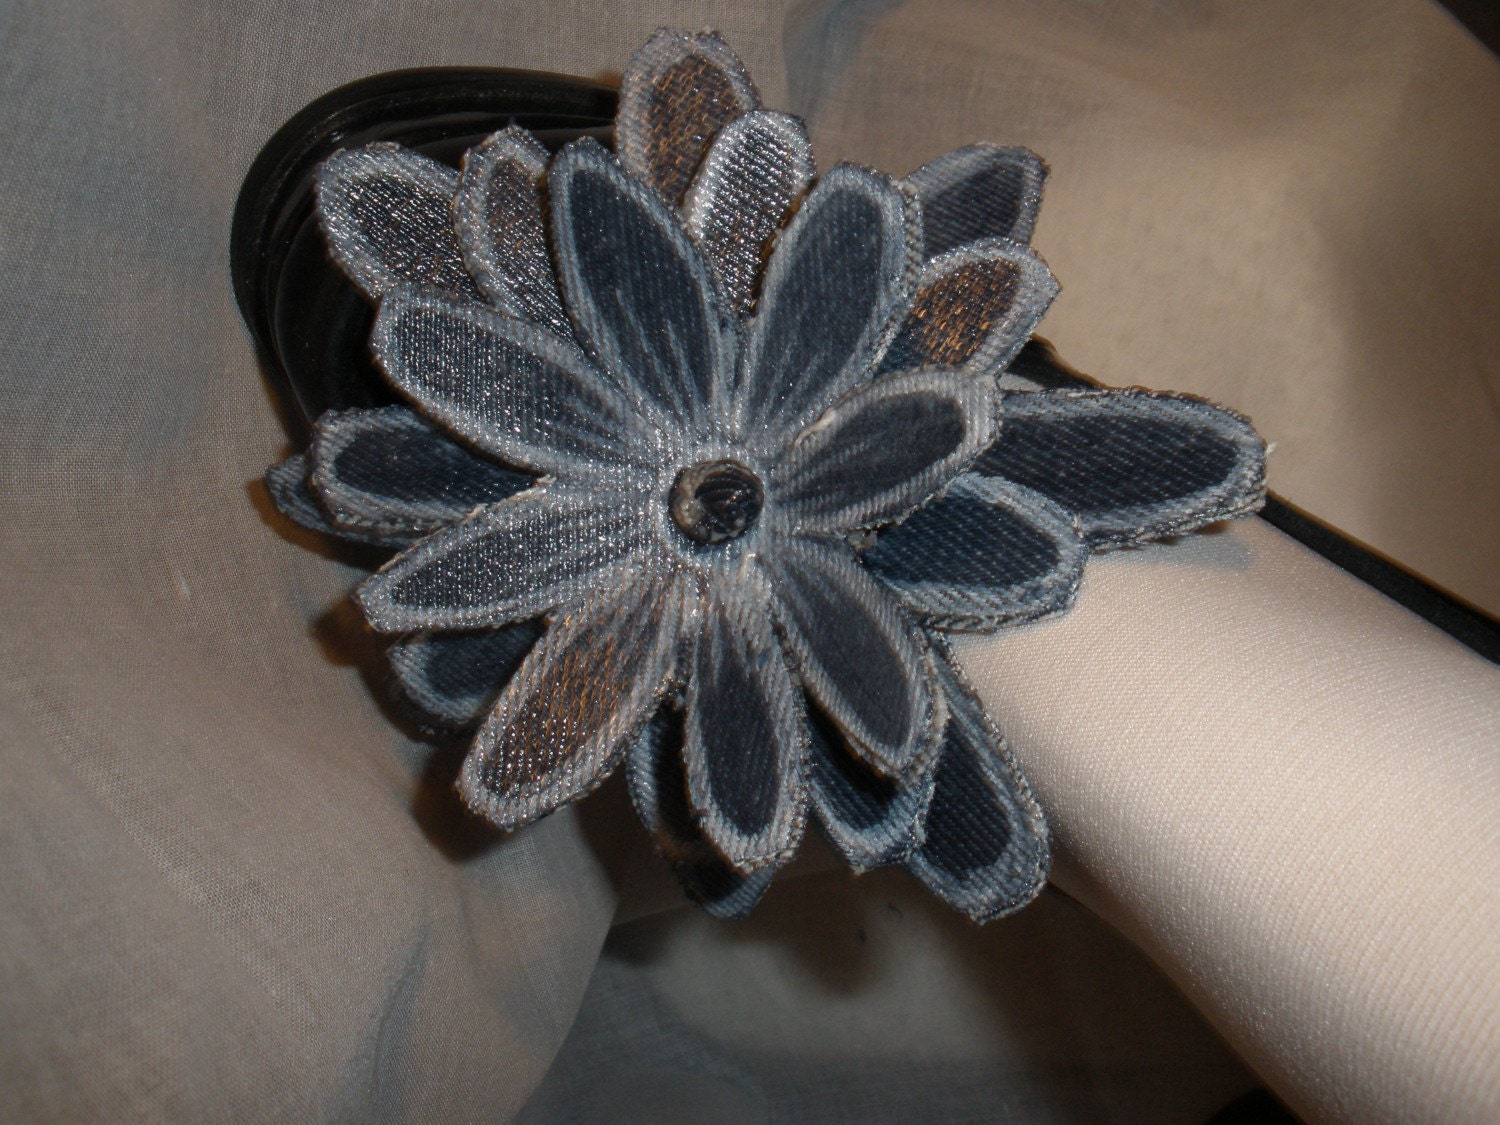 Adorable Star Burst Flower with White Tirm Wrap Accessories for Your High Heel Shoes Not Shoe Clip